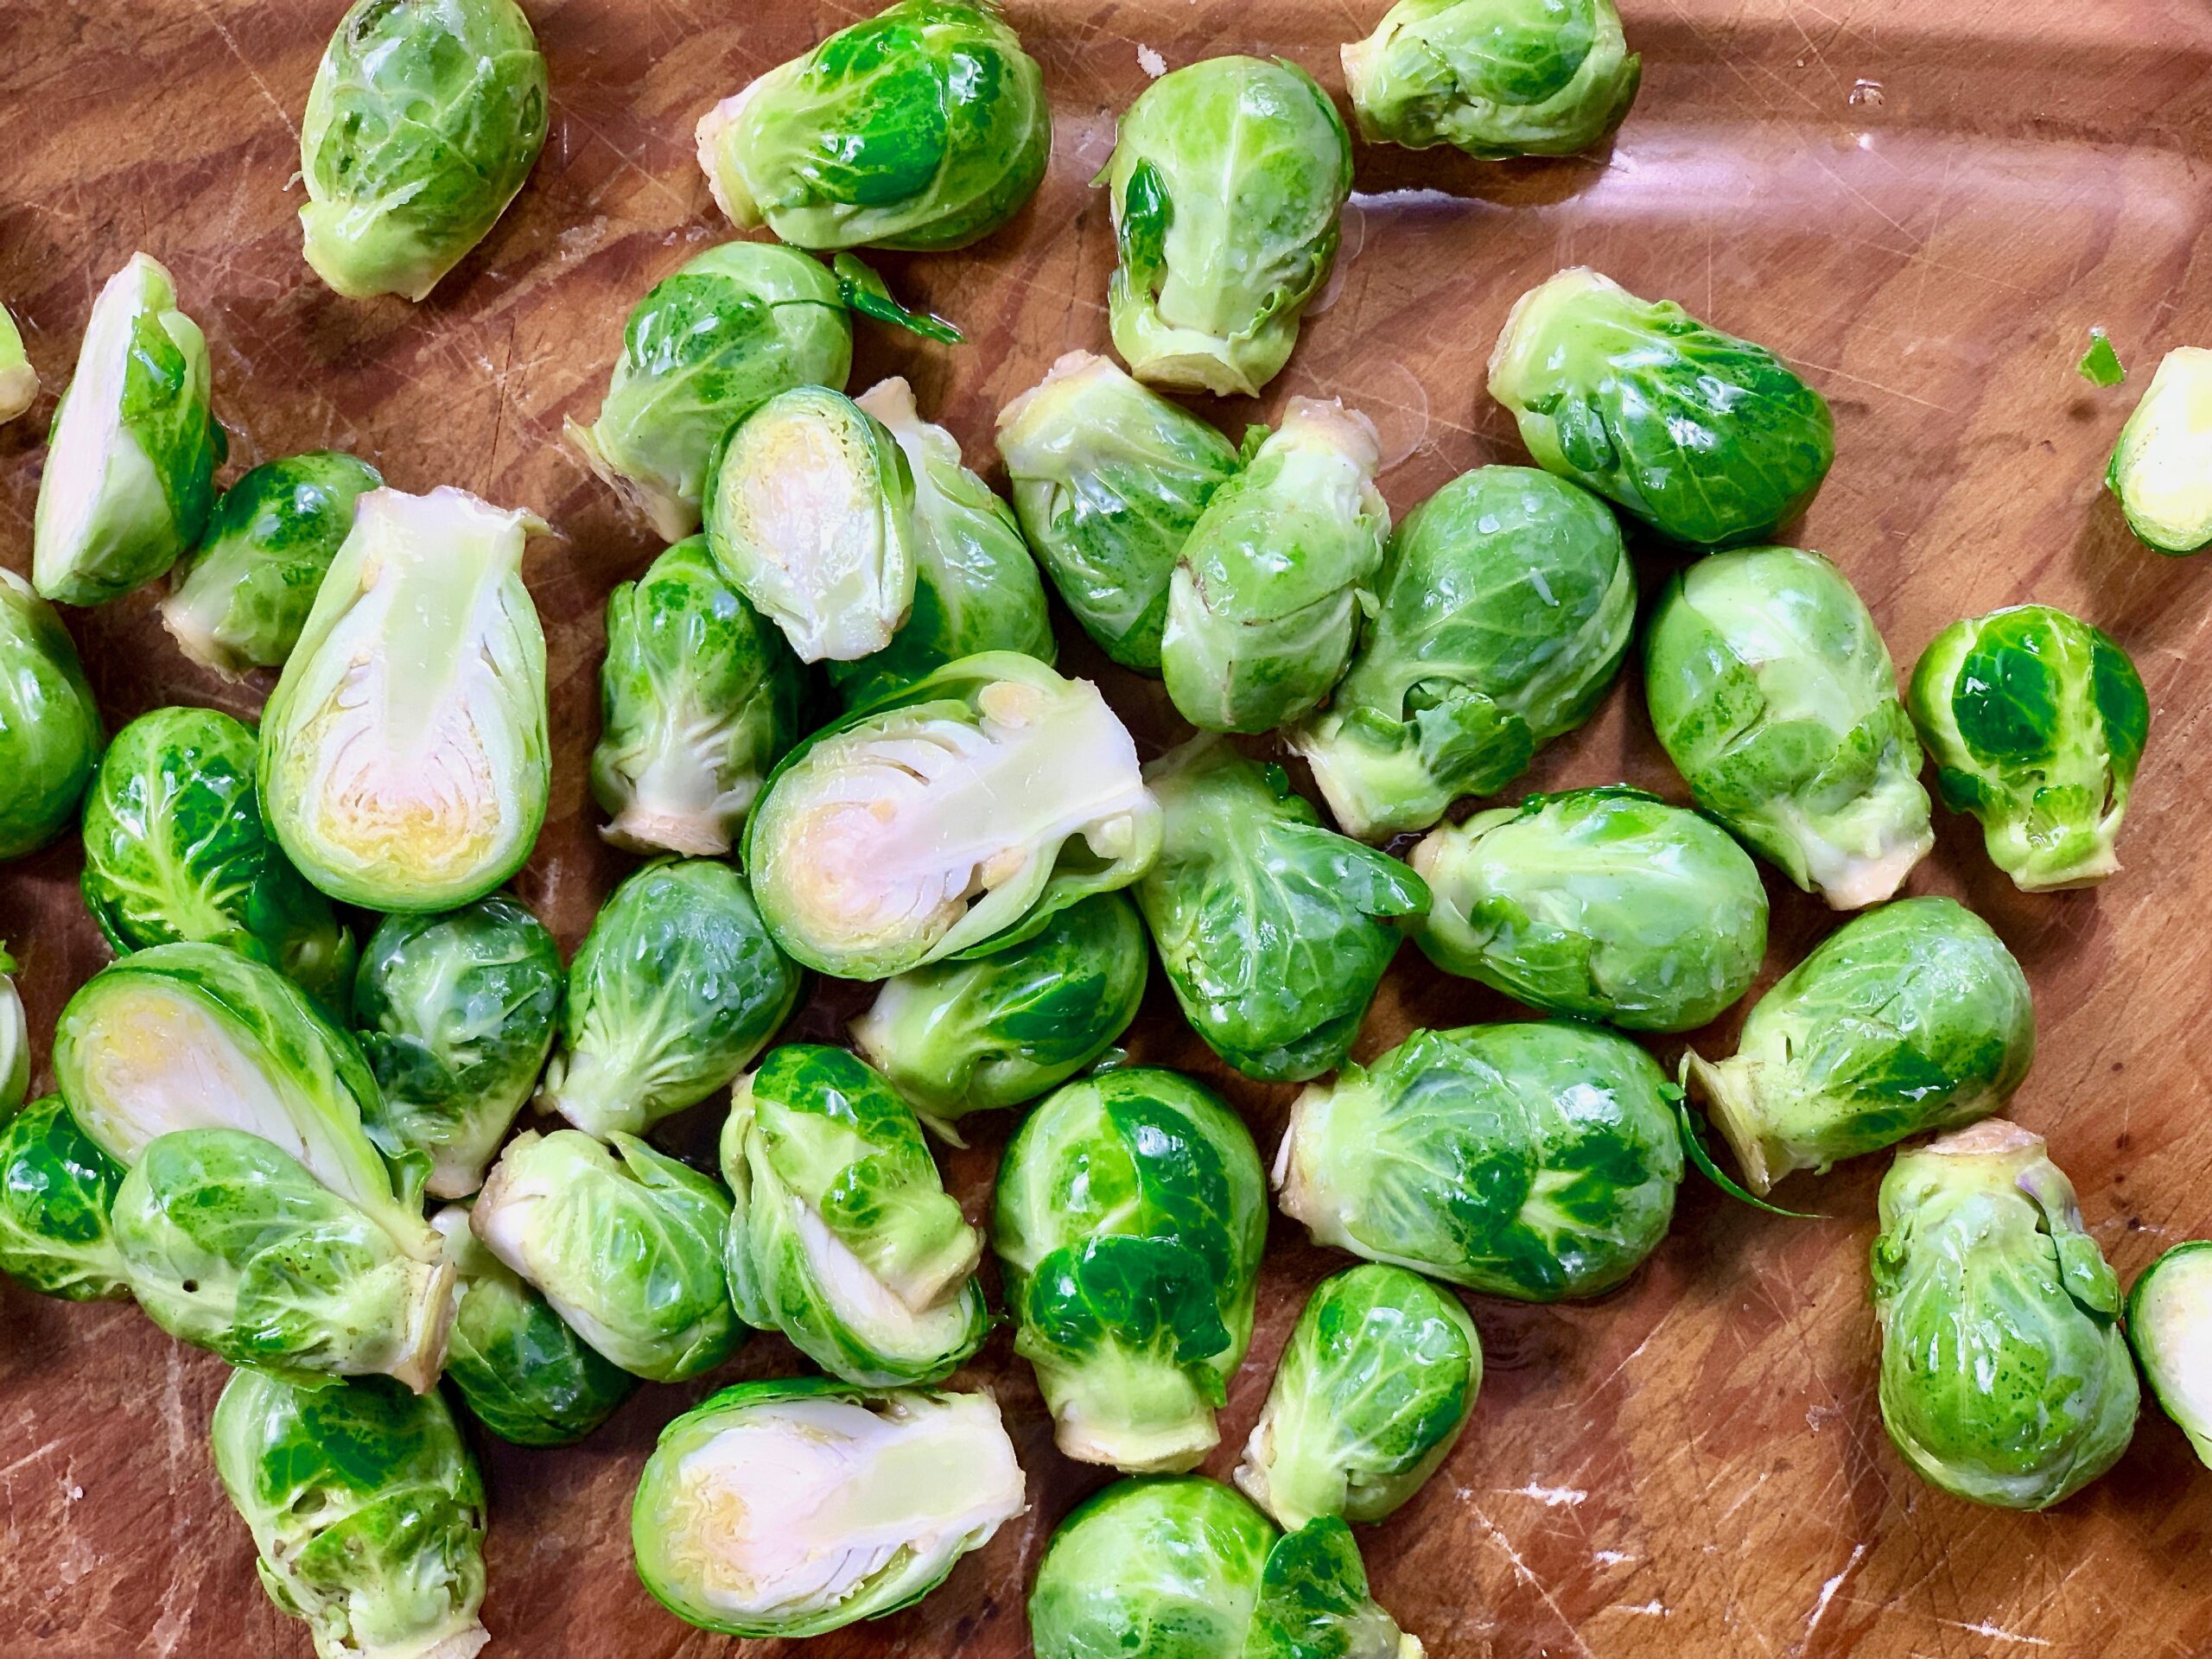 brussel sprouts before roasting in camel hump fat